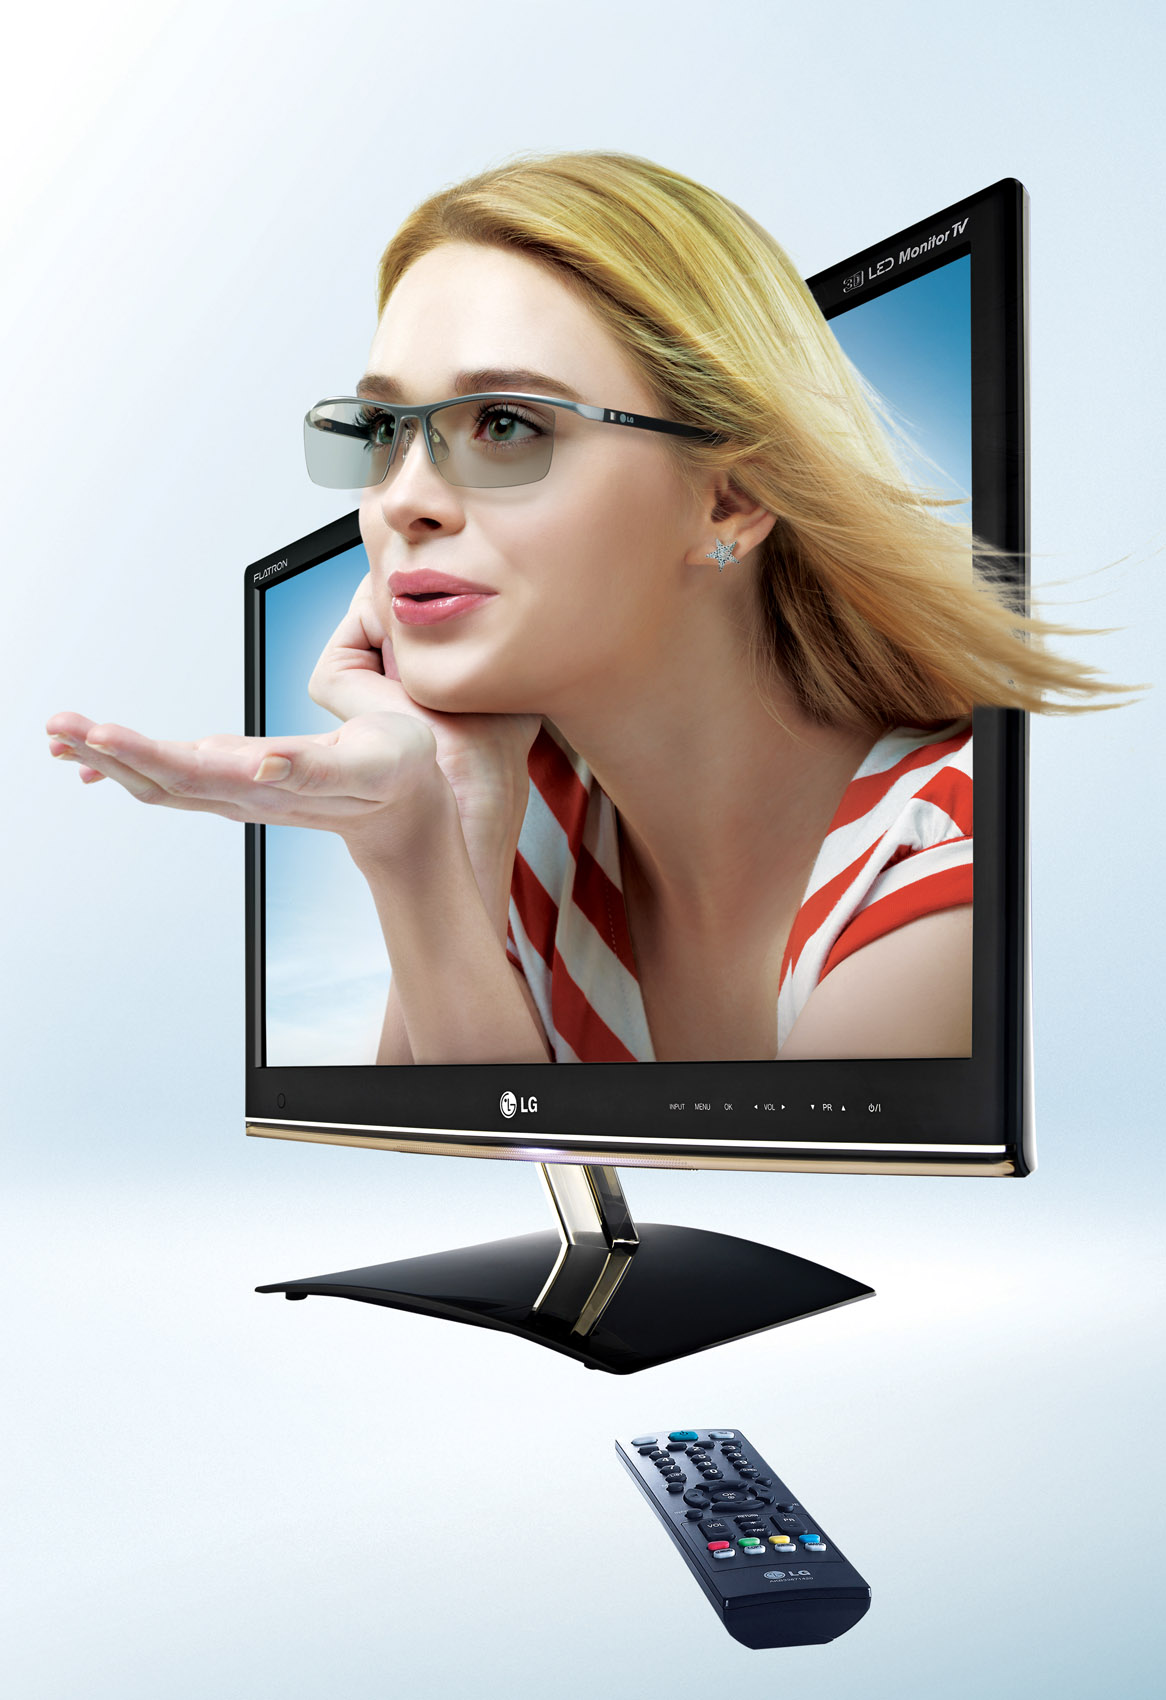 A model wearing 3D glasses breaking out of the LG 3D monitor’s (DM50D) display